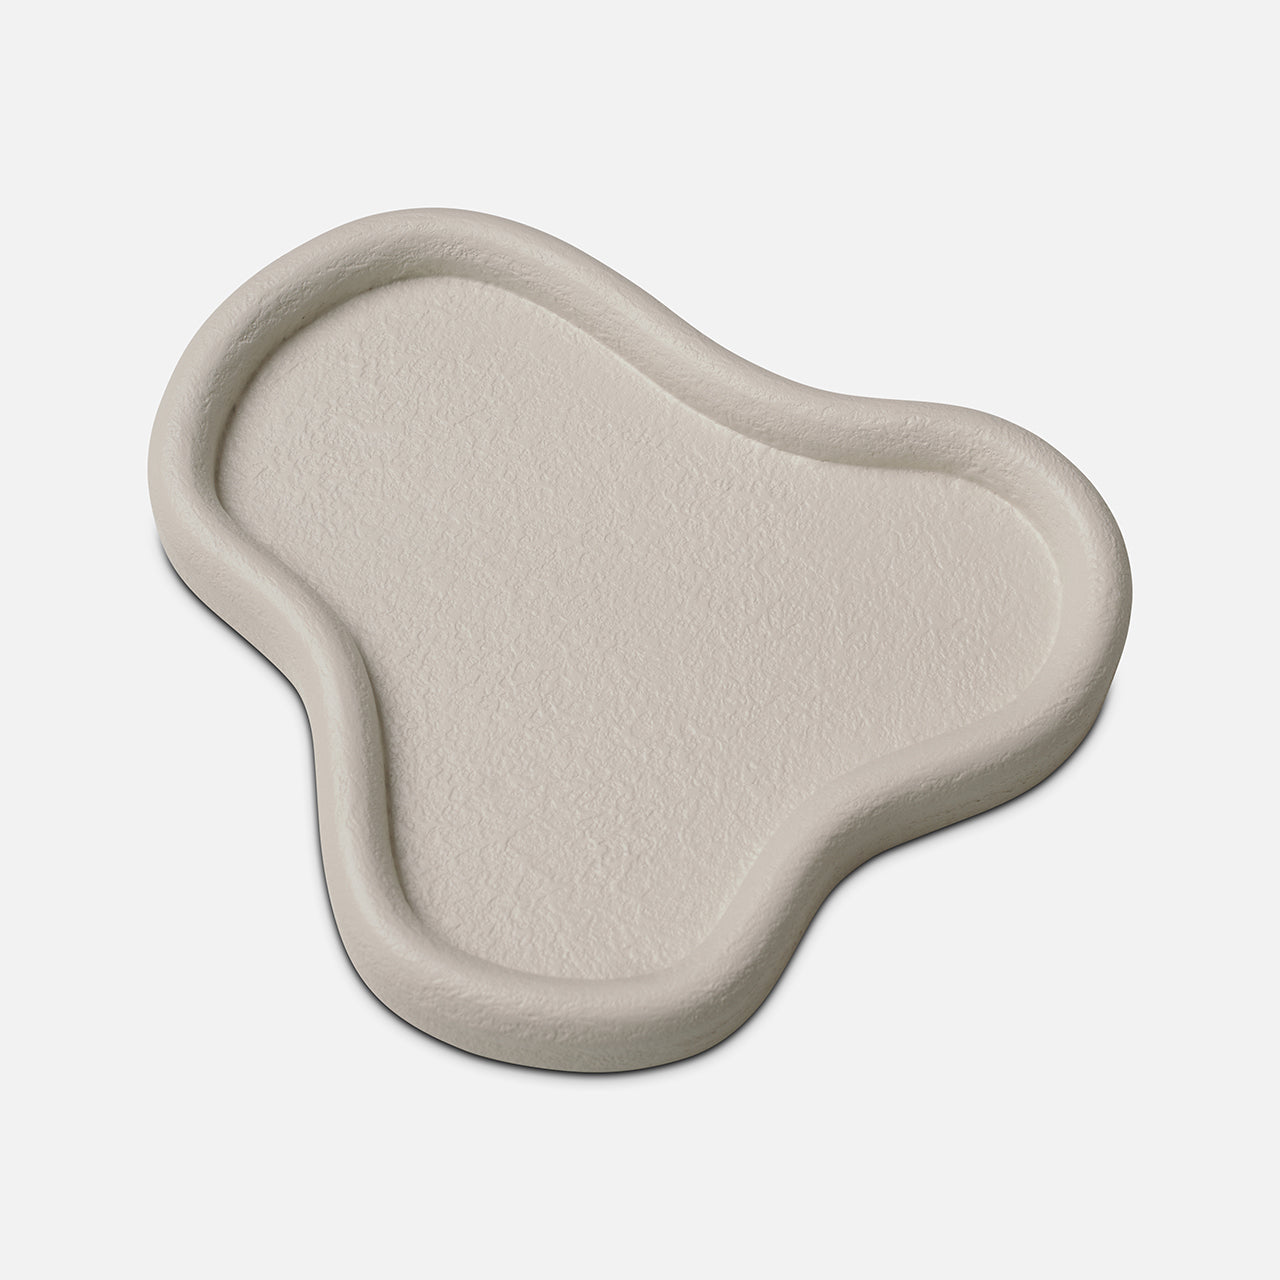 Lily Tray - Sage Green - Plaster Finish